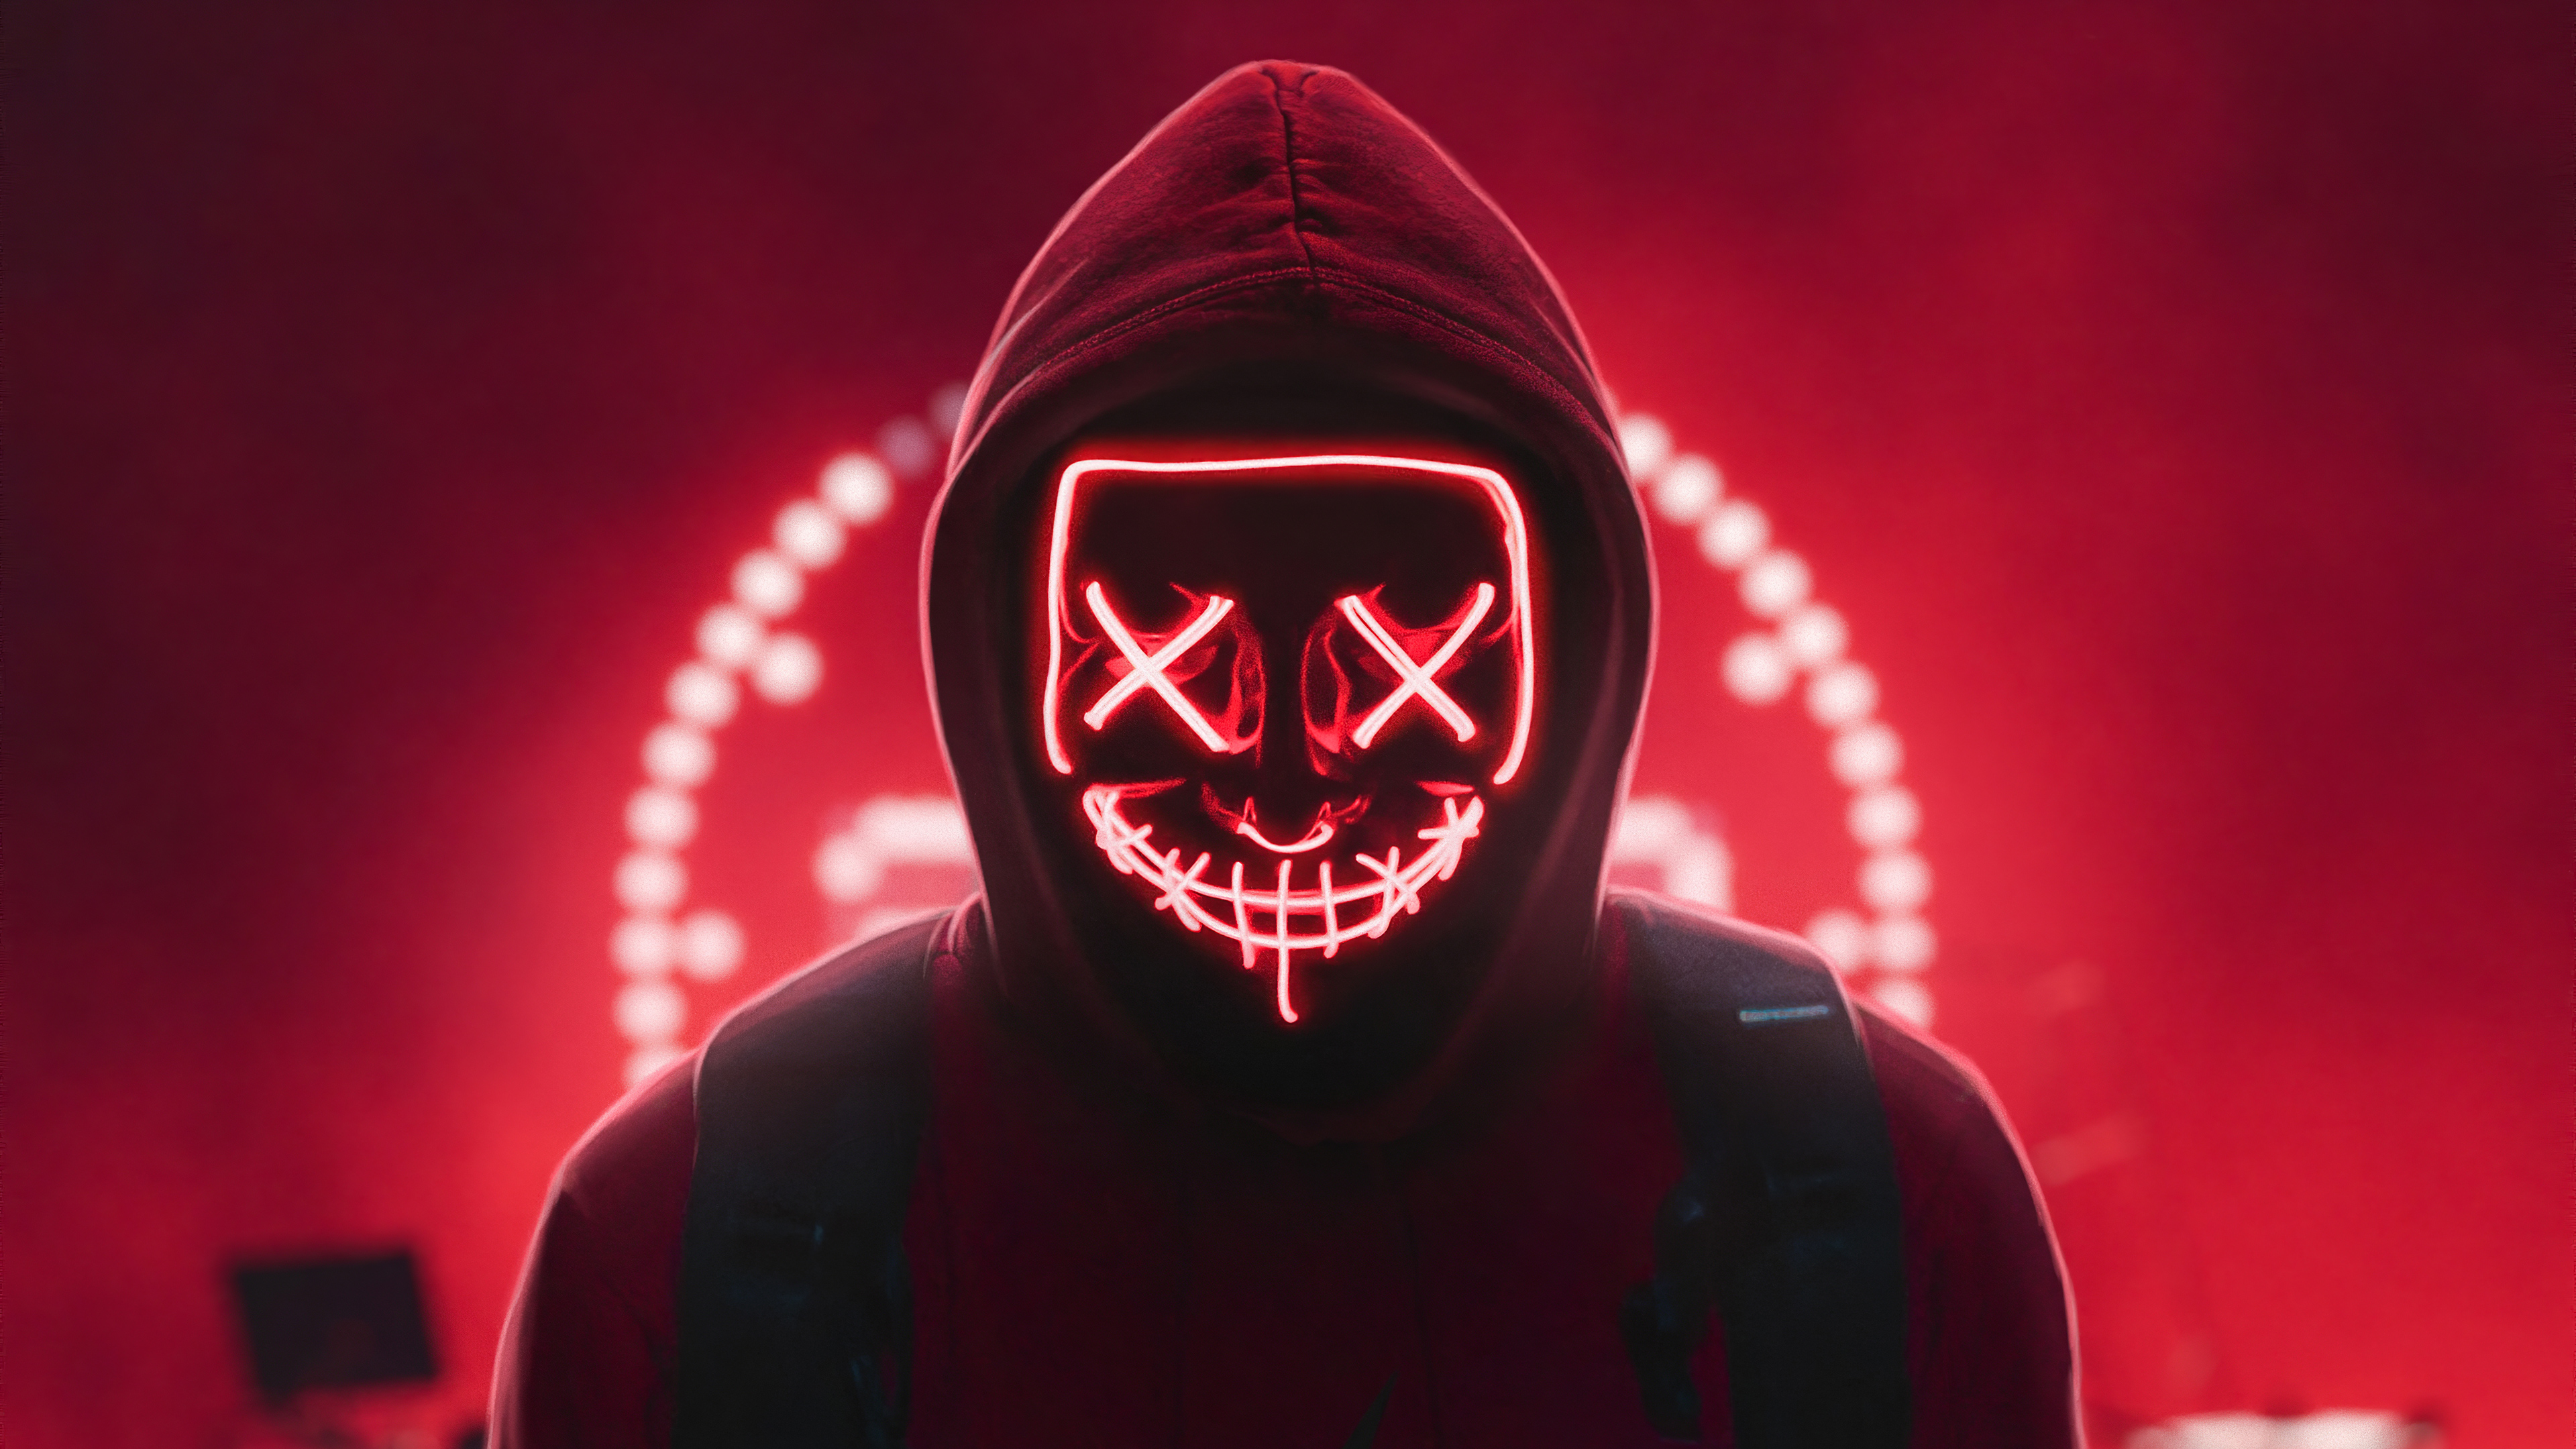 Neon Man 4k Hd Photography 4k Wallpapers Images Backgrounds Photos And Pictures